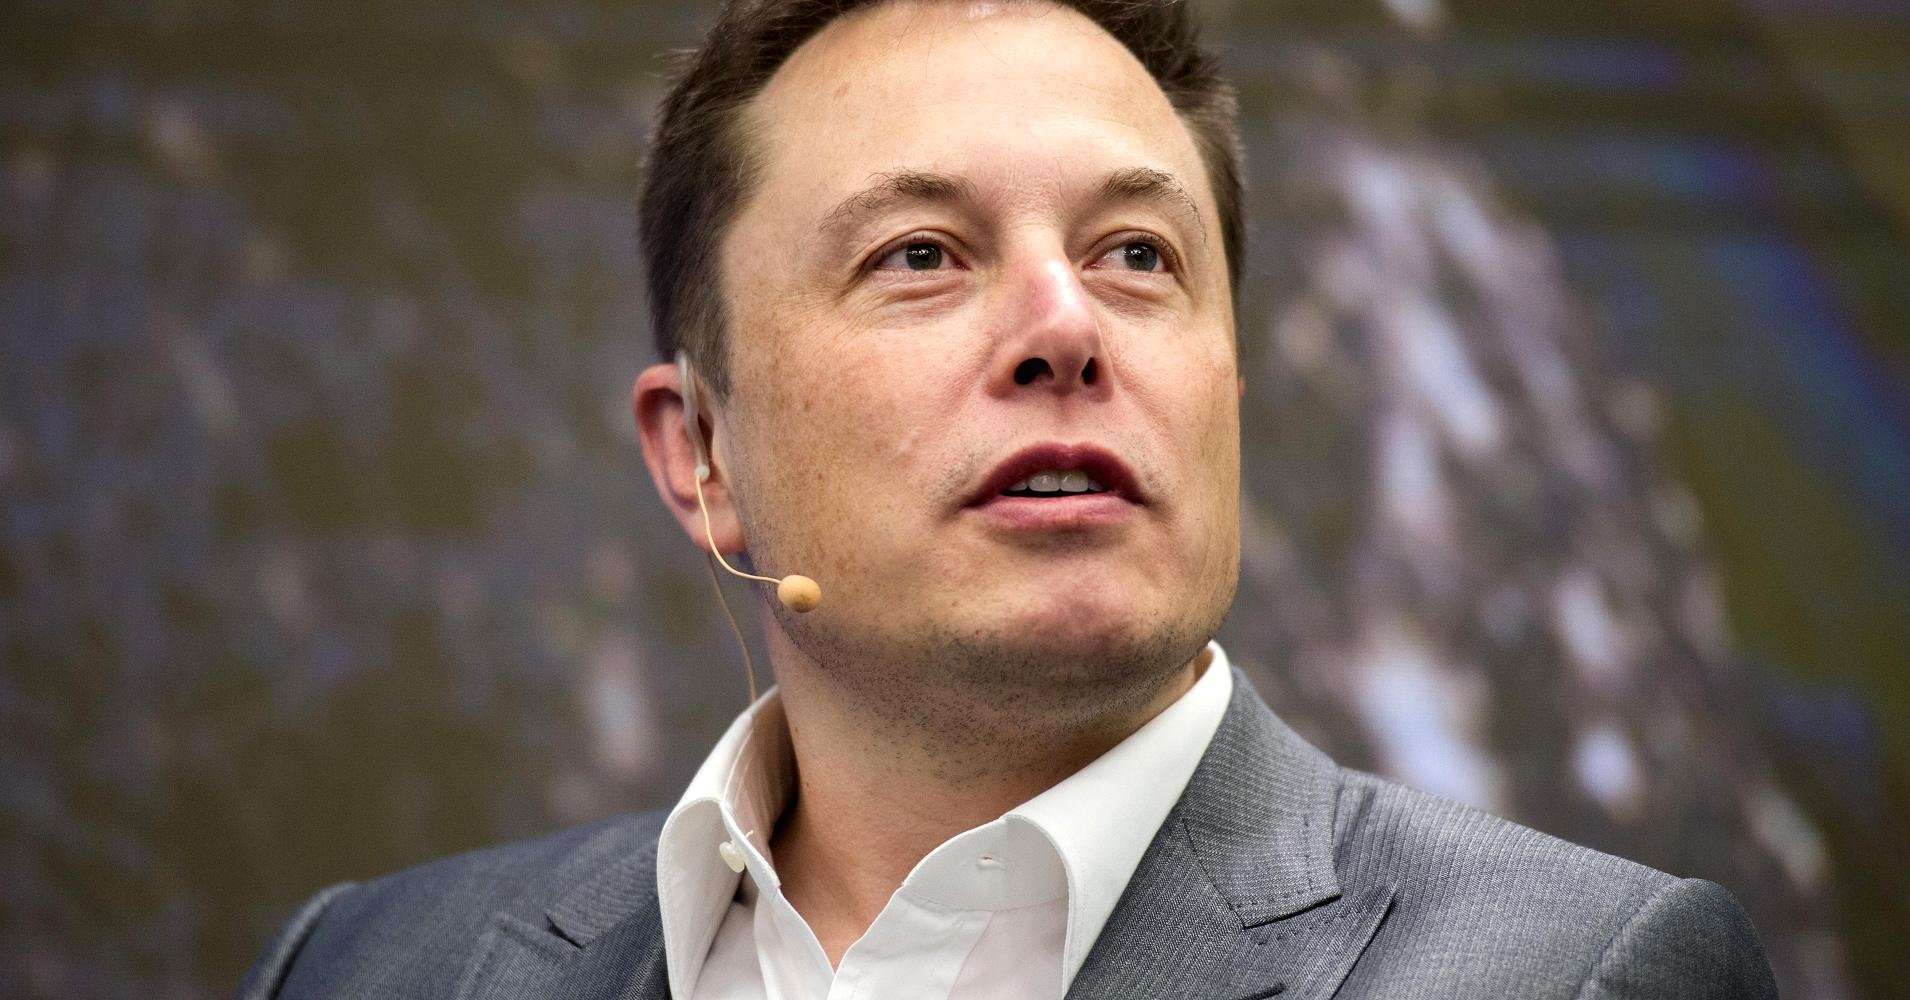 image for Elon Musk could help Puerto Rico's electricity issue after Hurricane Maria